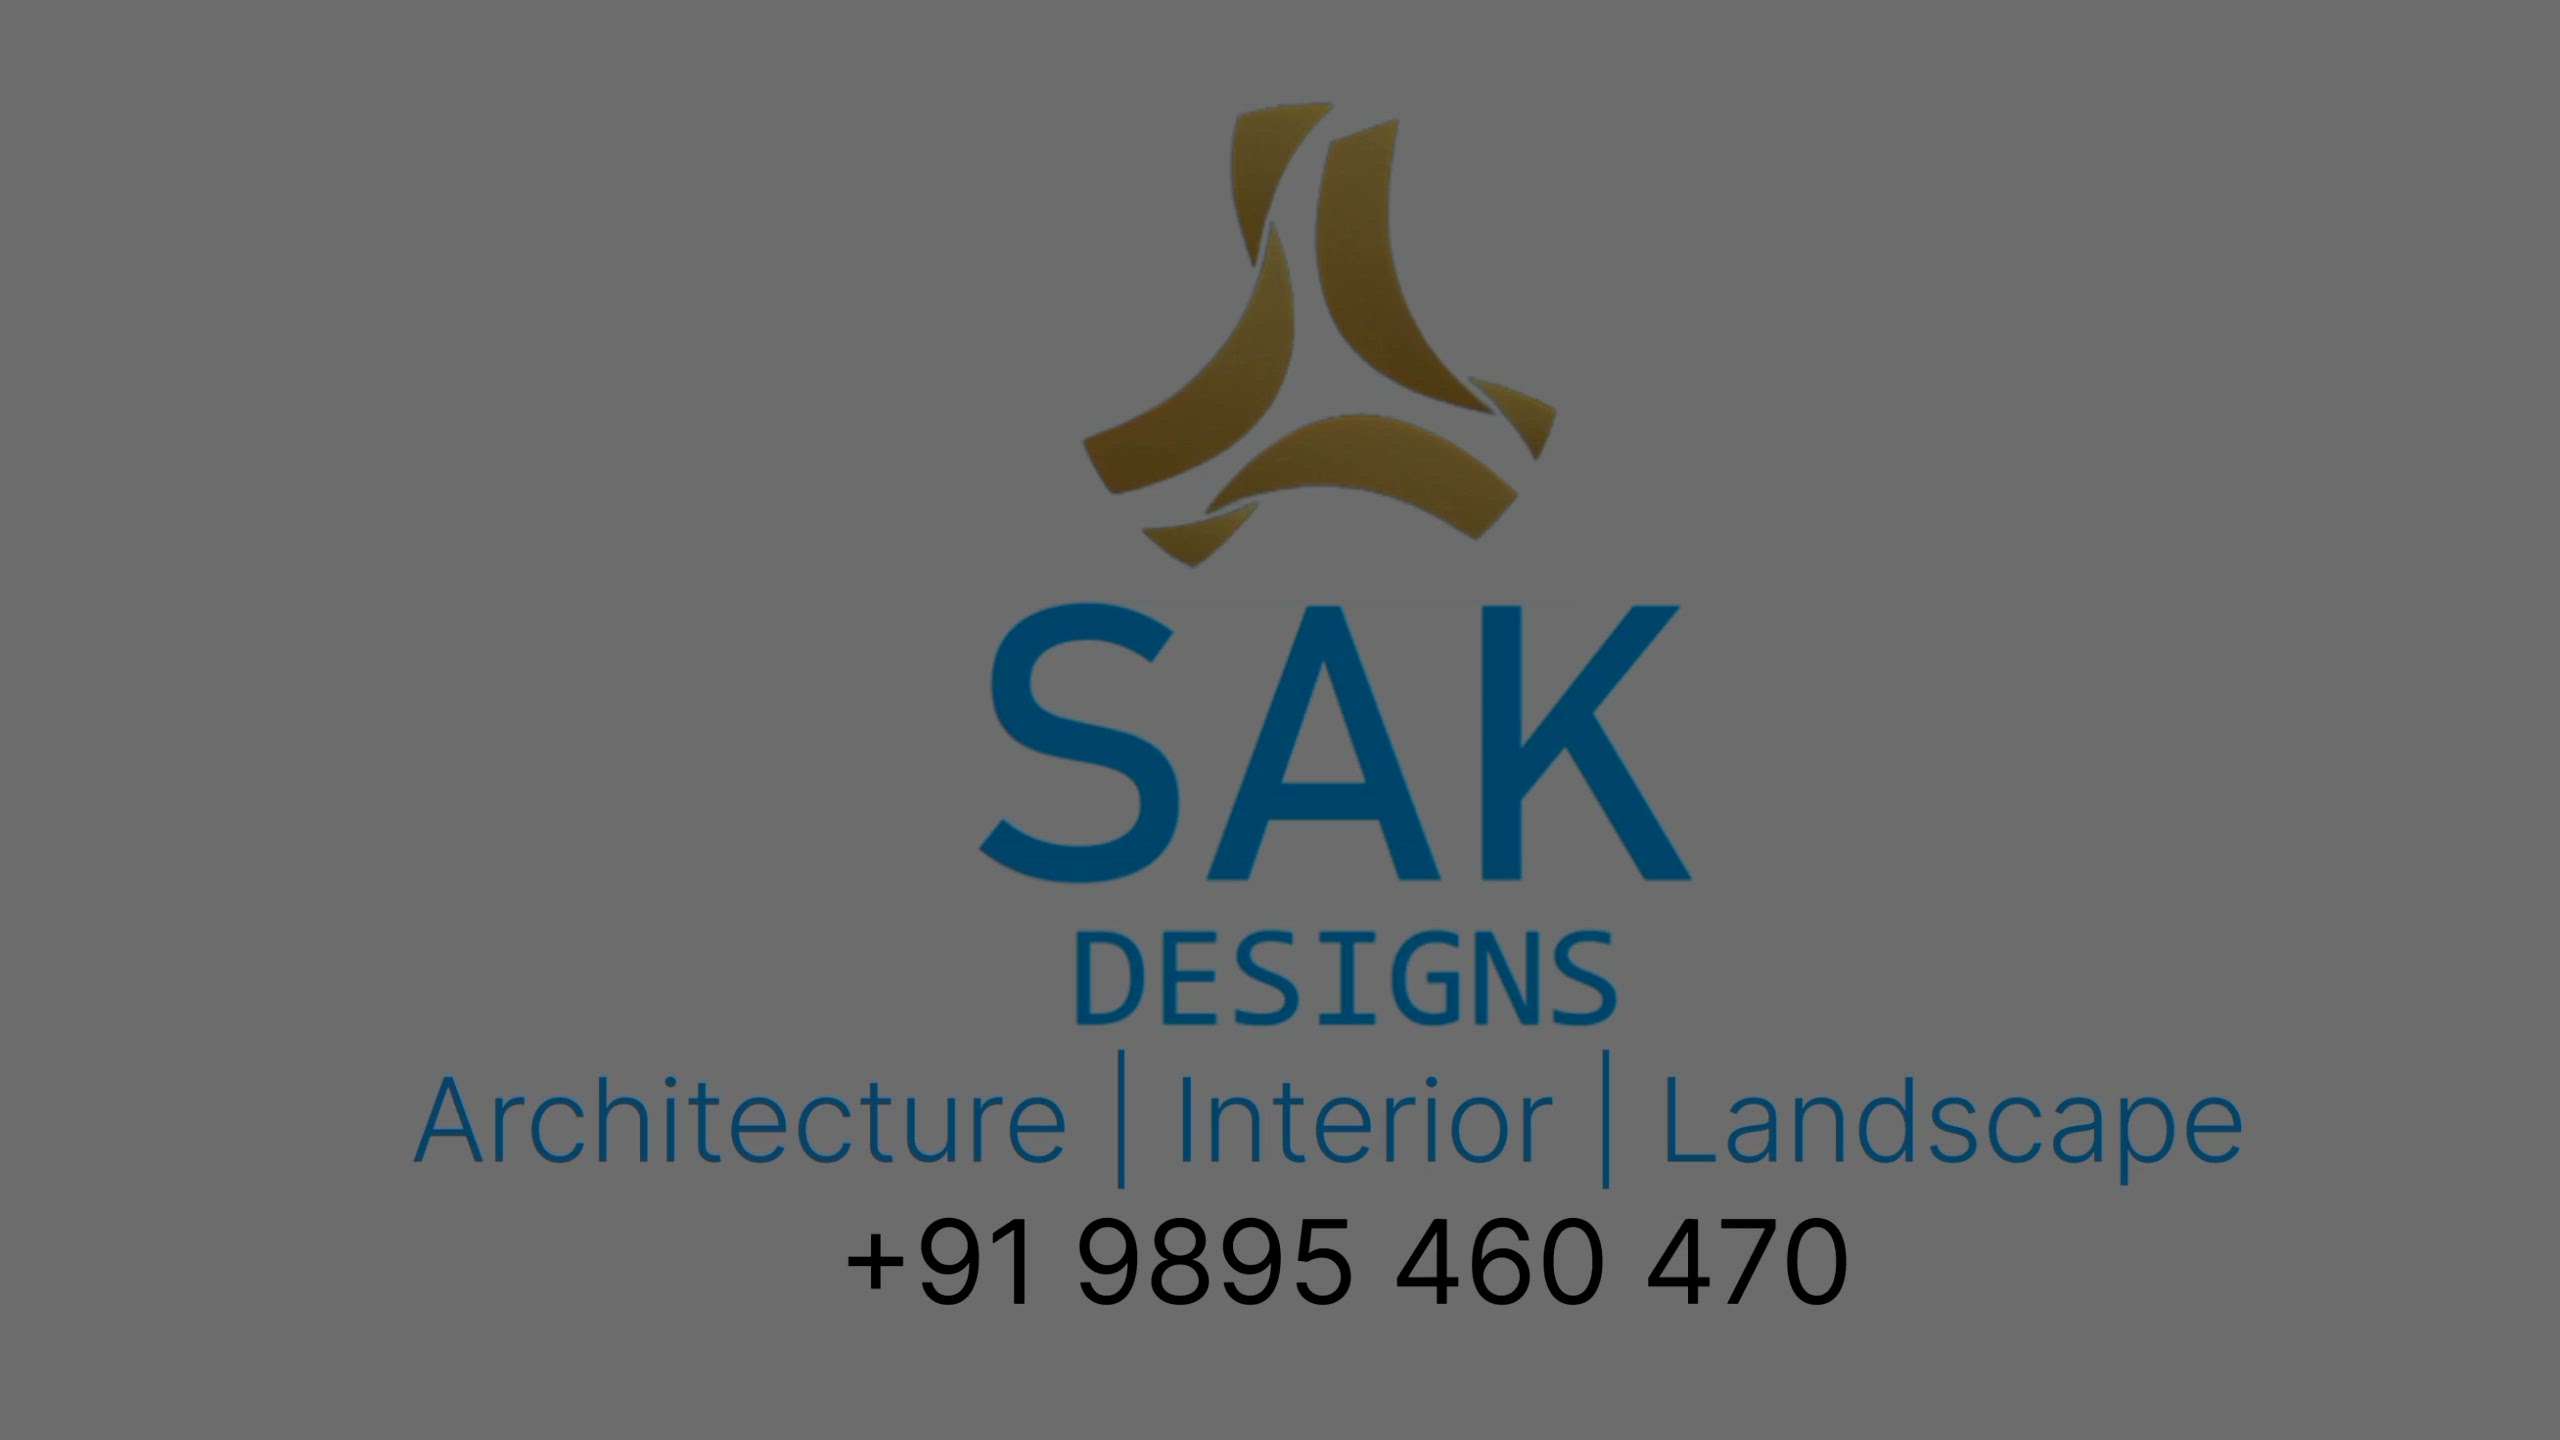 SAK Designs Ongoing Project @ Thrissur, Kerala.

3100 Sqft. (4 Bed Rooms, Formal Living, Family Living, Stair Area, Dining, Common Toilet, Wash, 2 Kitchens, Patio, Breakfast Area, ect.)

Service all over Kerala & parts of South India.

Contact: +91 9895 460 470

#ElevationHome #architecturedesigns #Architect #Architectural&Interior #kerala_architecture #architecturedesigners #best_architect #bestexterior  #homeelevation #homeexterior #ContemporaryDesigns #ContemporaryHouse #HouseConstruction #contemporary #semi_contemporary_home_design #FlatRoof #FlatRoofHouse #flatroof&sloped #fusion #fusionarchitecture #fusiondesign  #TraditionalHouse #SlopingRoofHouse #beautifulhouse #beautifulhomes #beautifulhomedesigns #HouseConstruction #HouseDesigns #KeralaStyleHouse #LandscapeGarden #LandscapeIdeas #LandscapeDesign #landscapedesigner #compoundwall #compoundwalldesign #gates #NaturalGrass #trusswork #trussdesign #setout #sitevisit #sitestories #FalseCeiling.